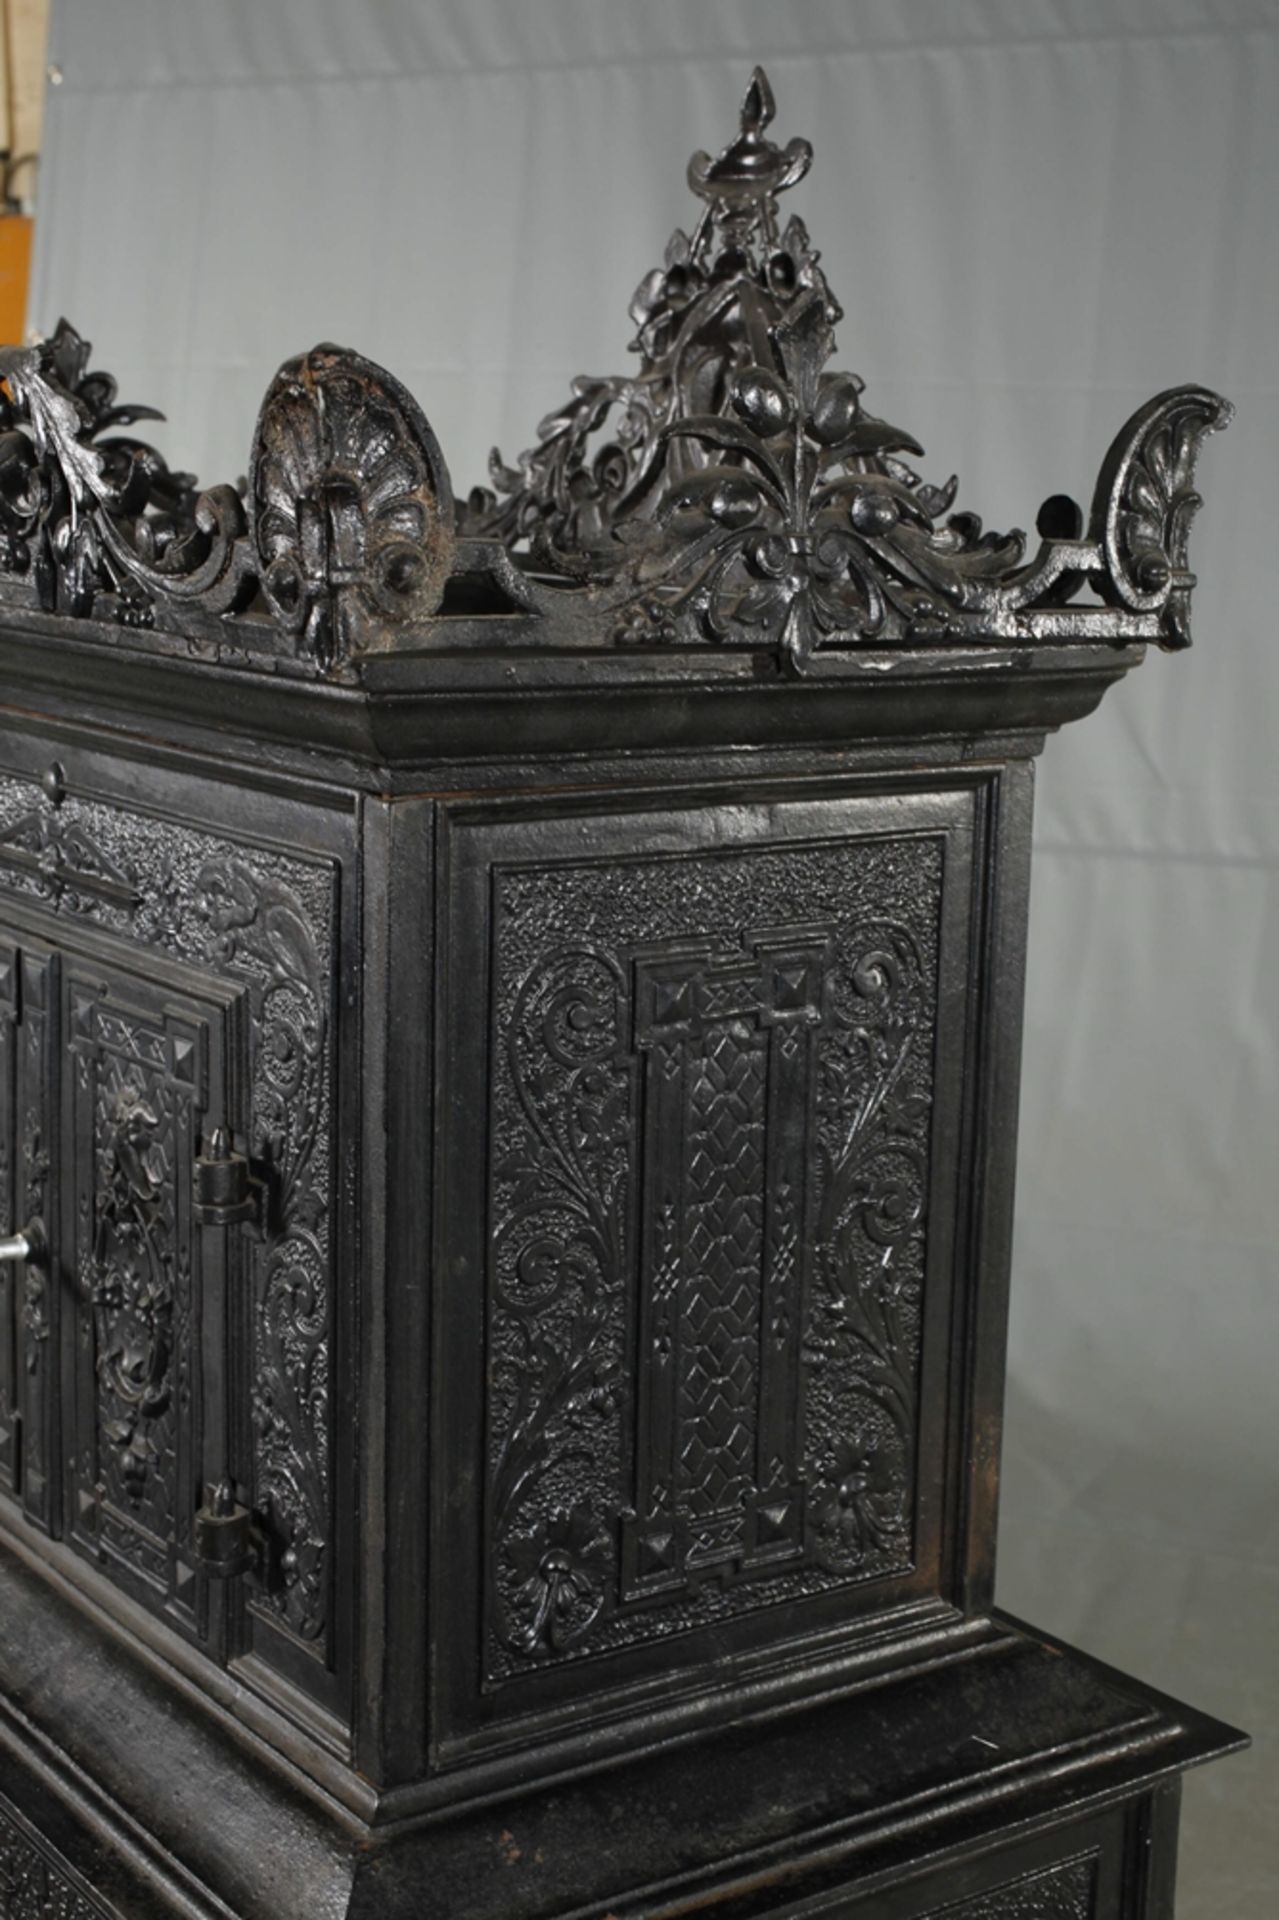 Cast iron deck stove - Image 4 of 7